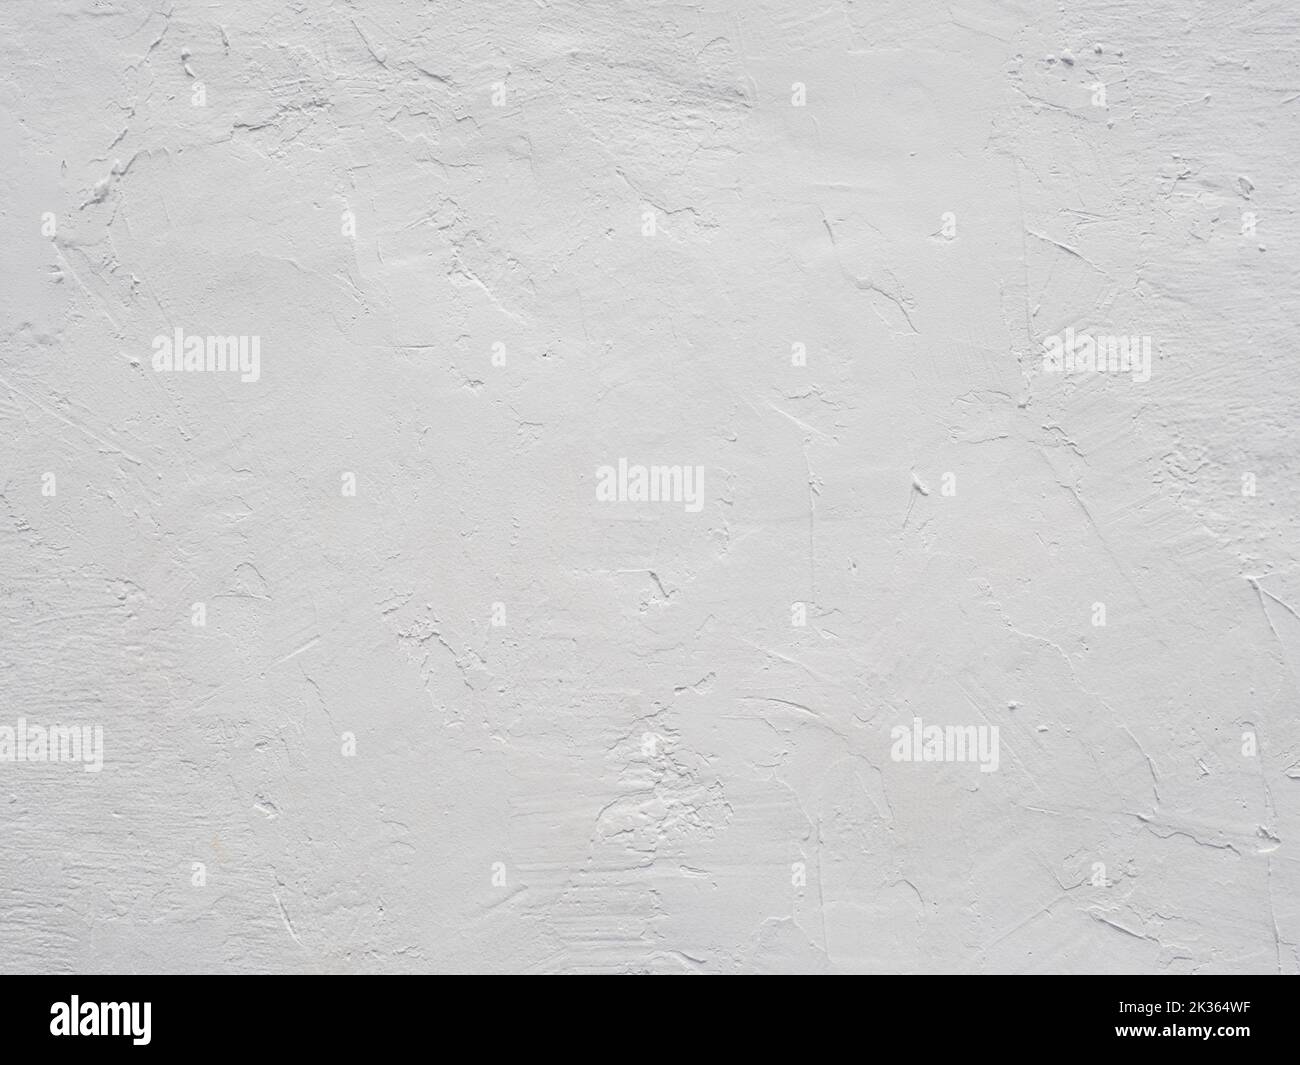 The white plastered stucco wall. Gray concrete wall abstract background. Grunge wide. Stock Photo